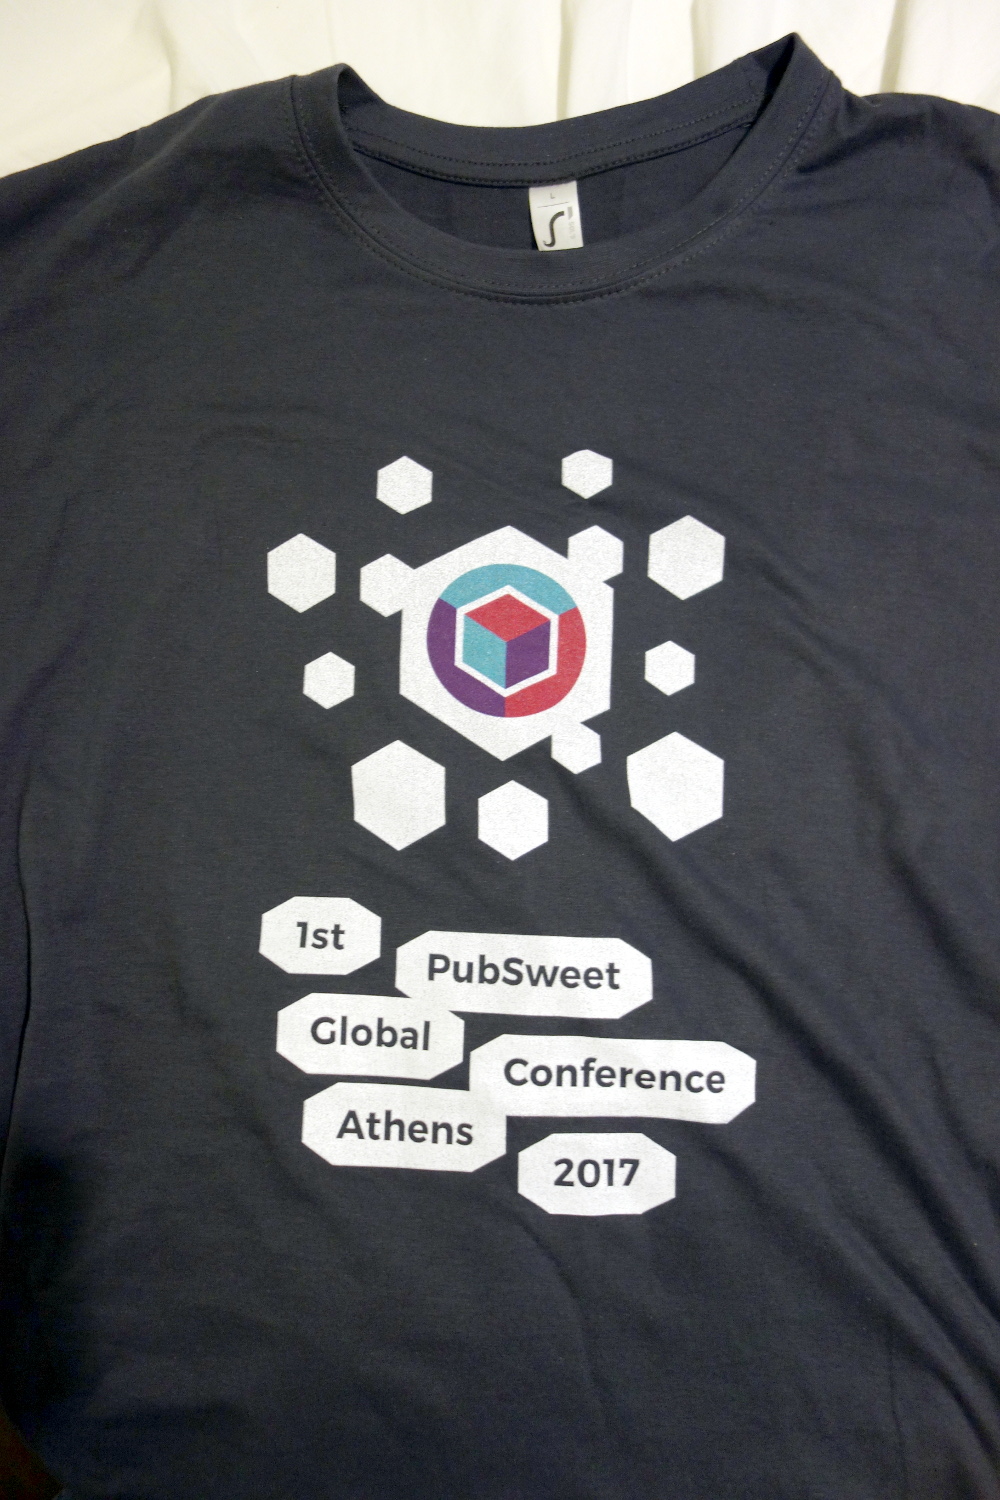 No event is complete without a t-shirt!